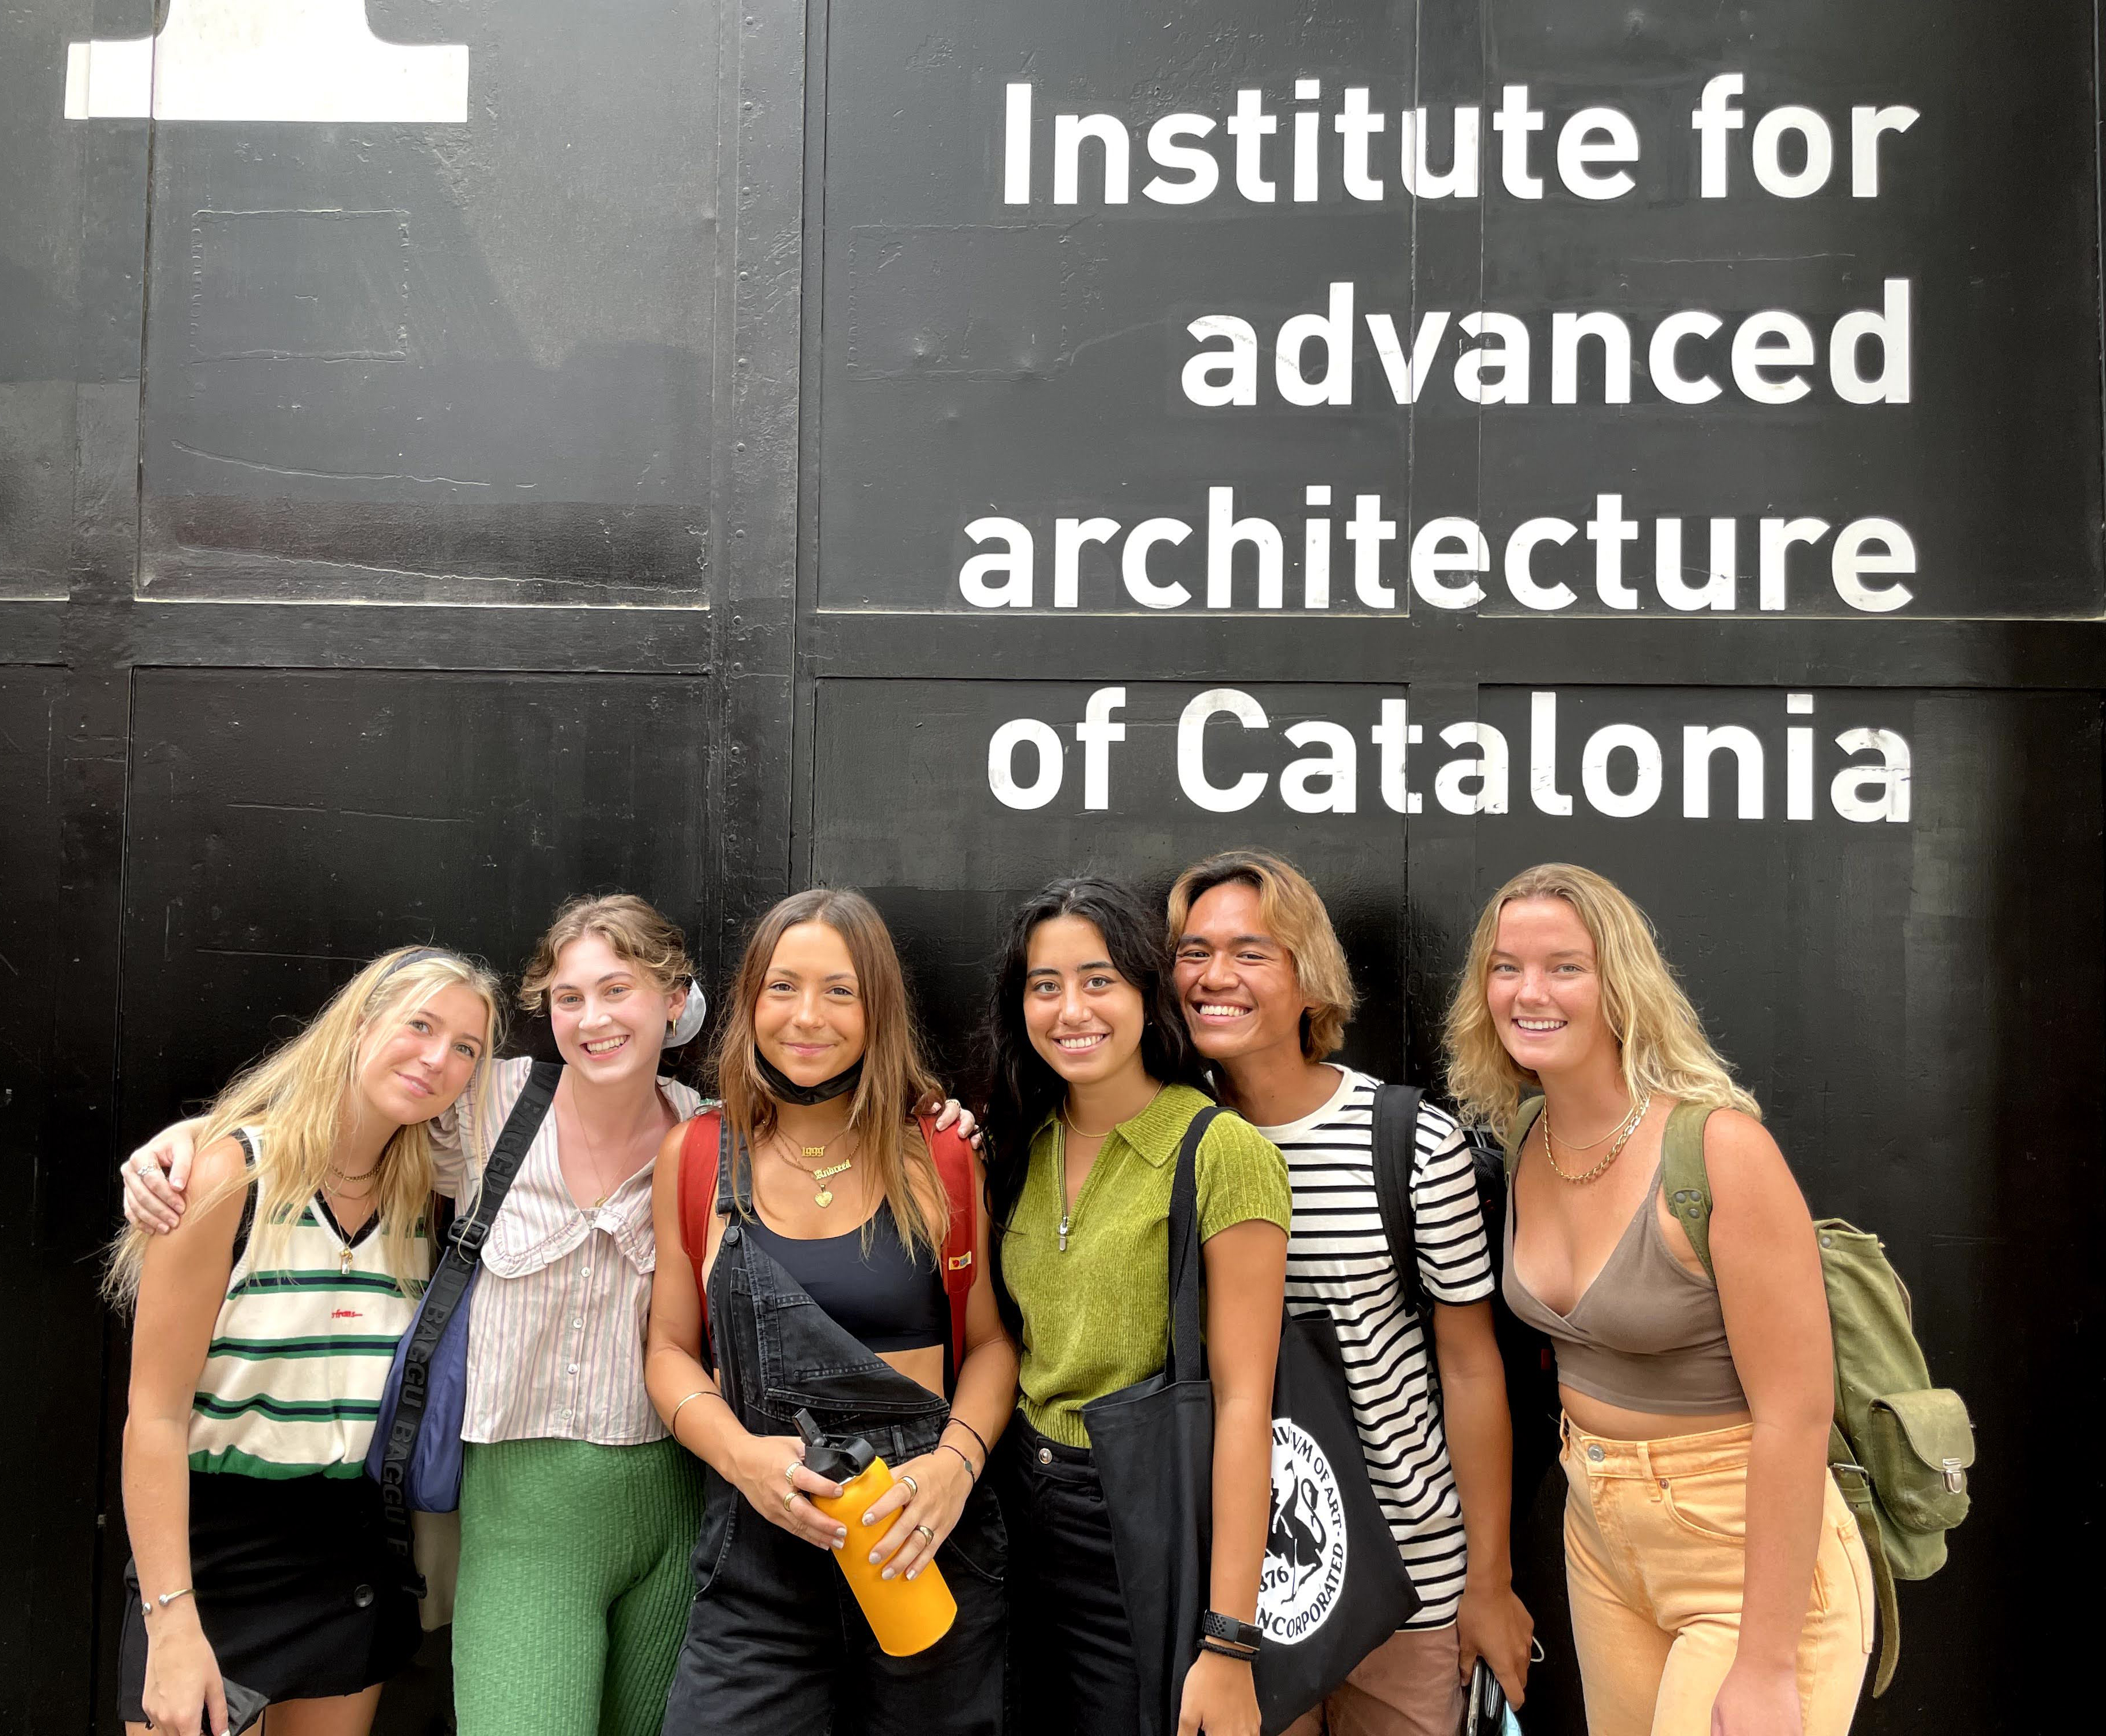 Institution for advanced architecture of Catalonia